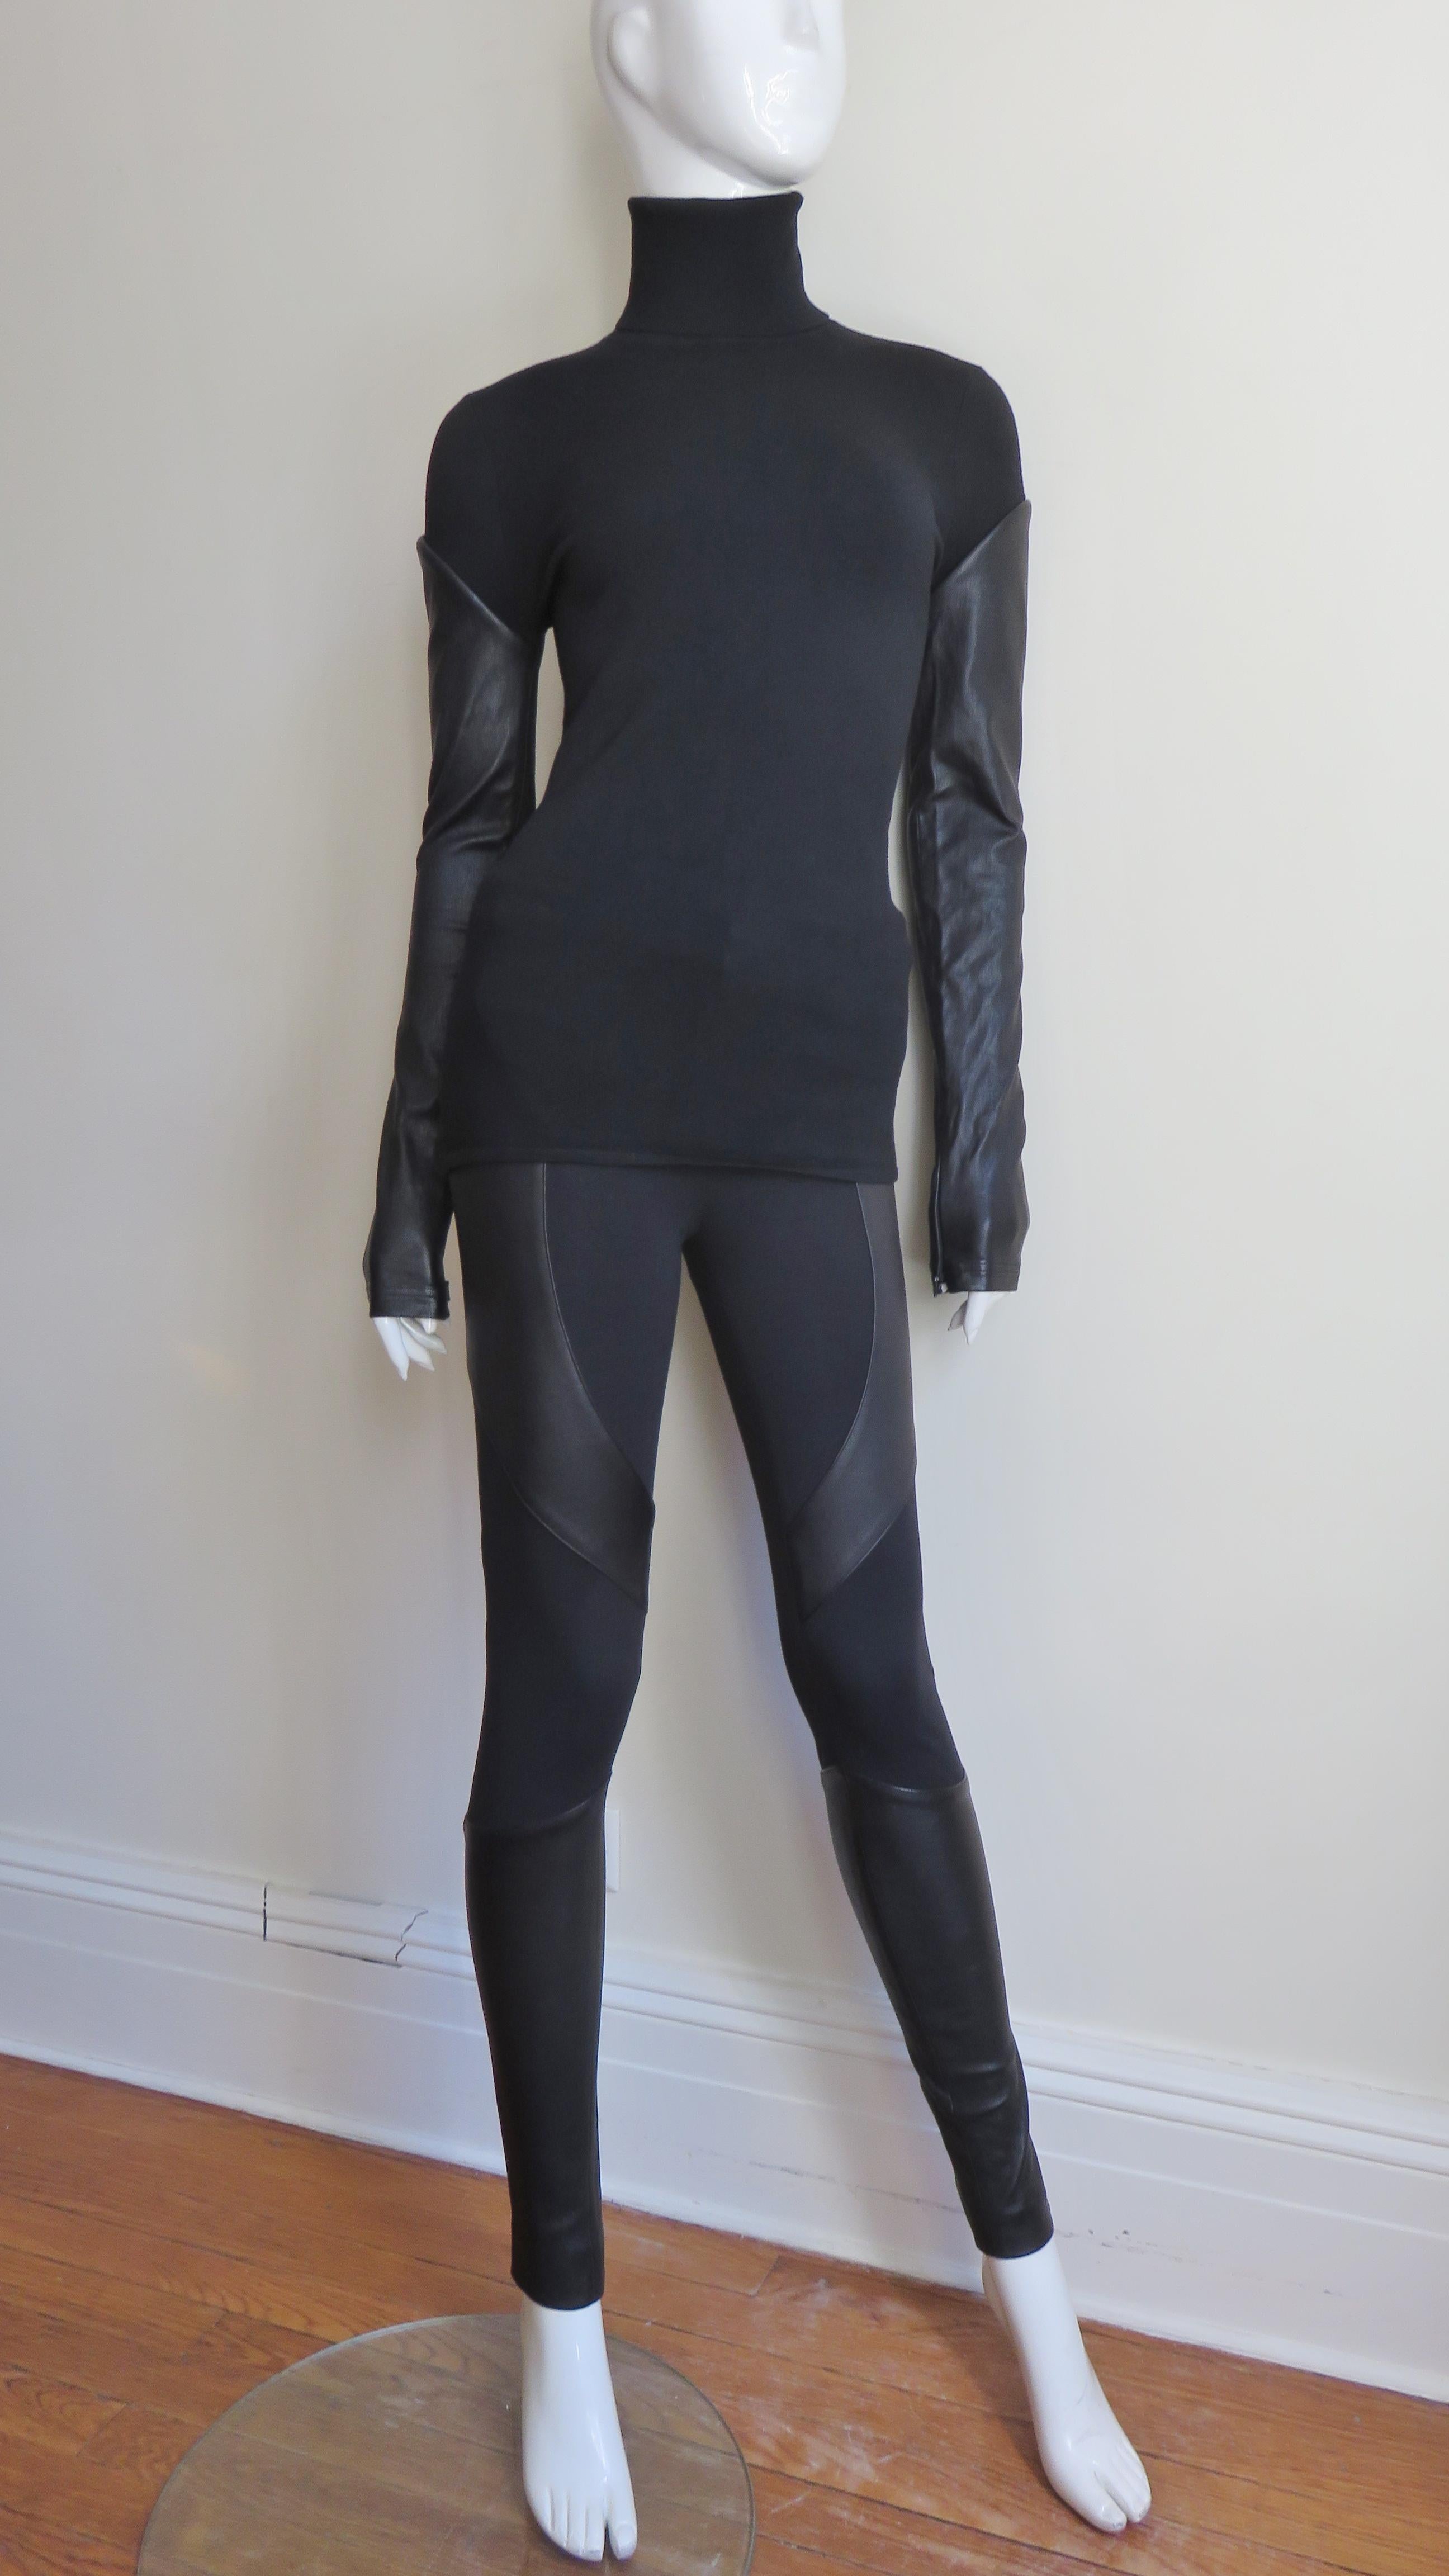 Women's Givenchy Pants and Turtleneck with Leather Insets